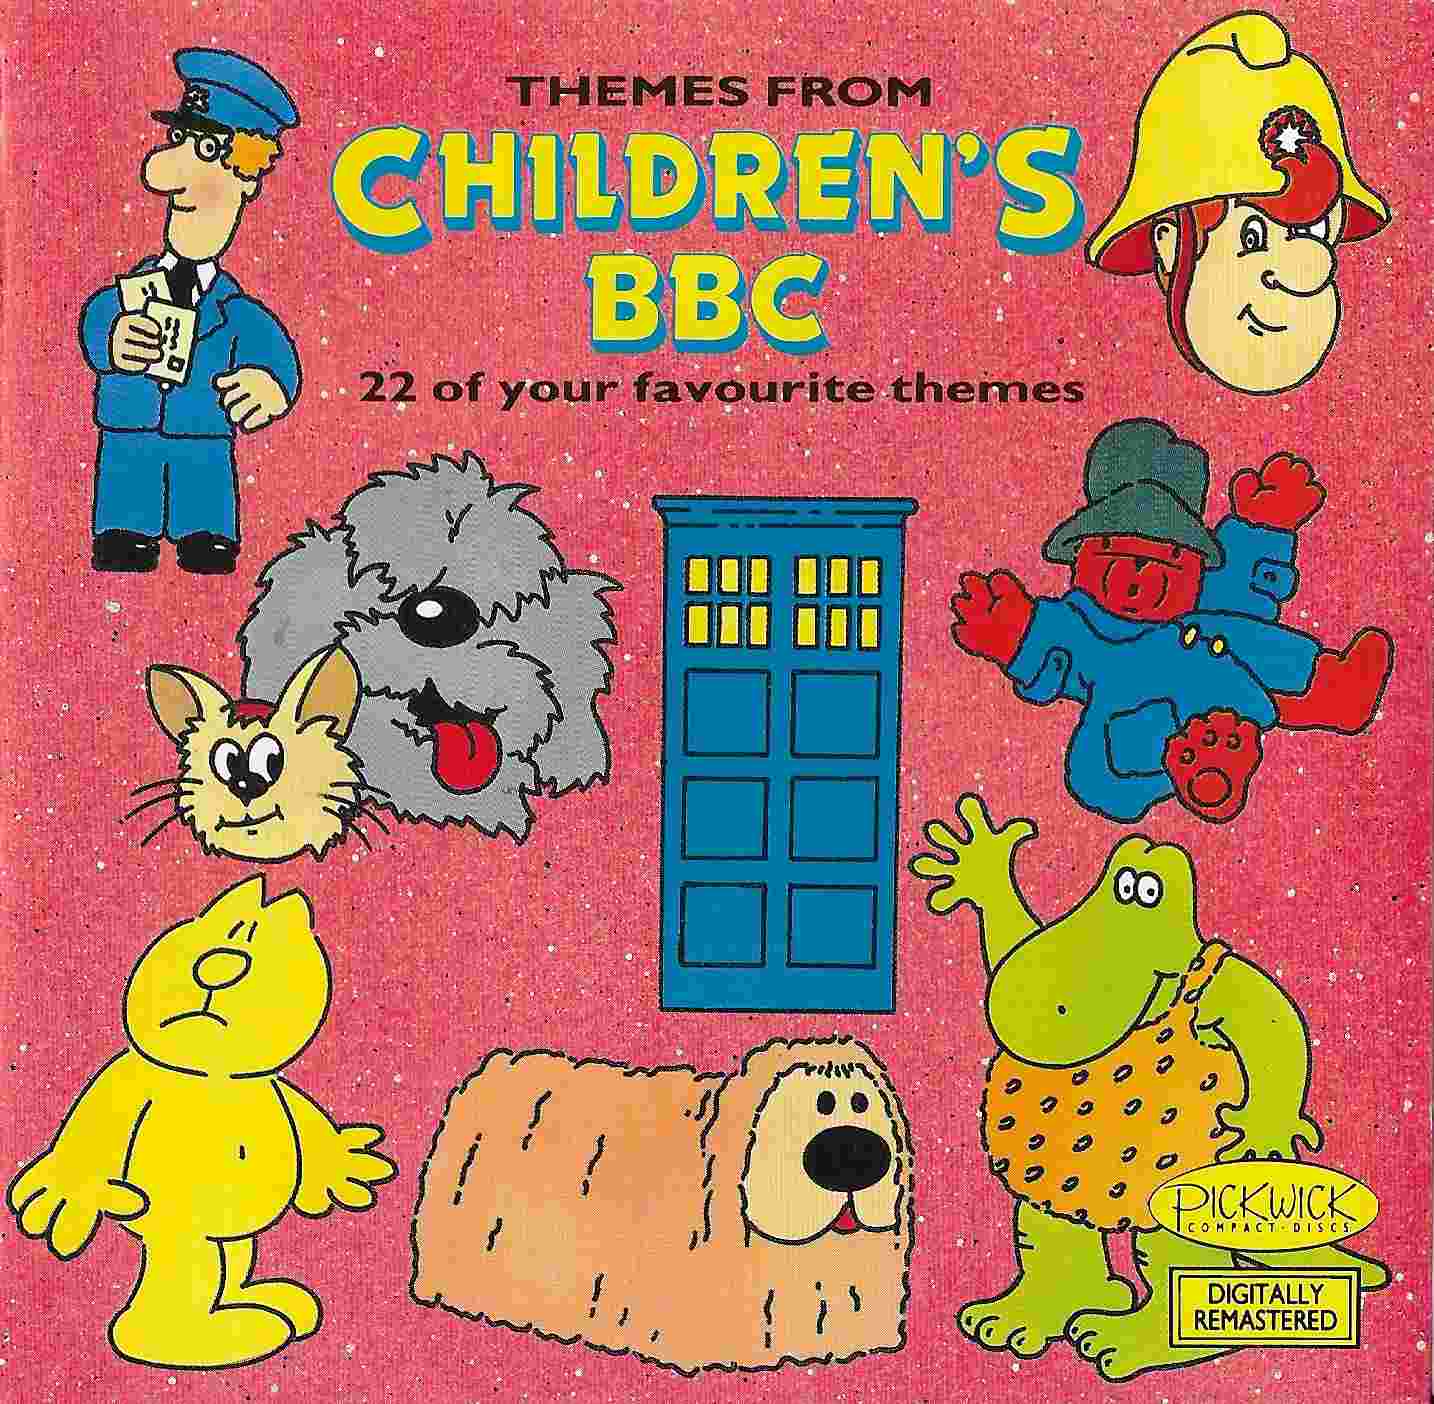 Picture of PWKS 650 Children's themes from the BBC by artist Various from the BBC cds - Records and Tapes library